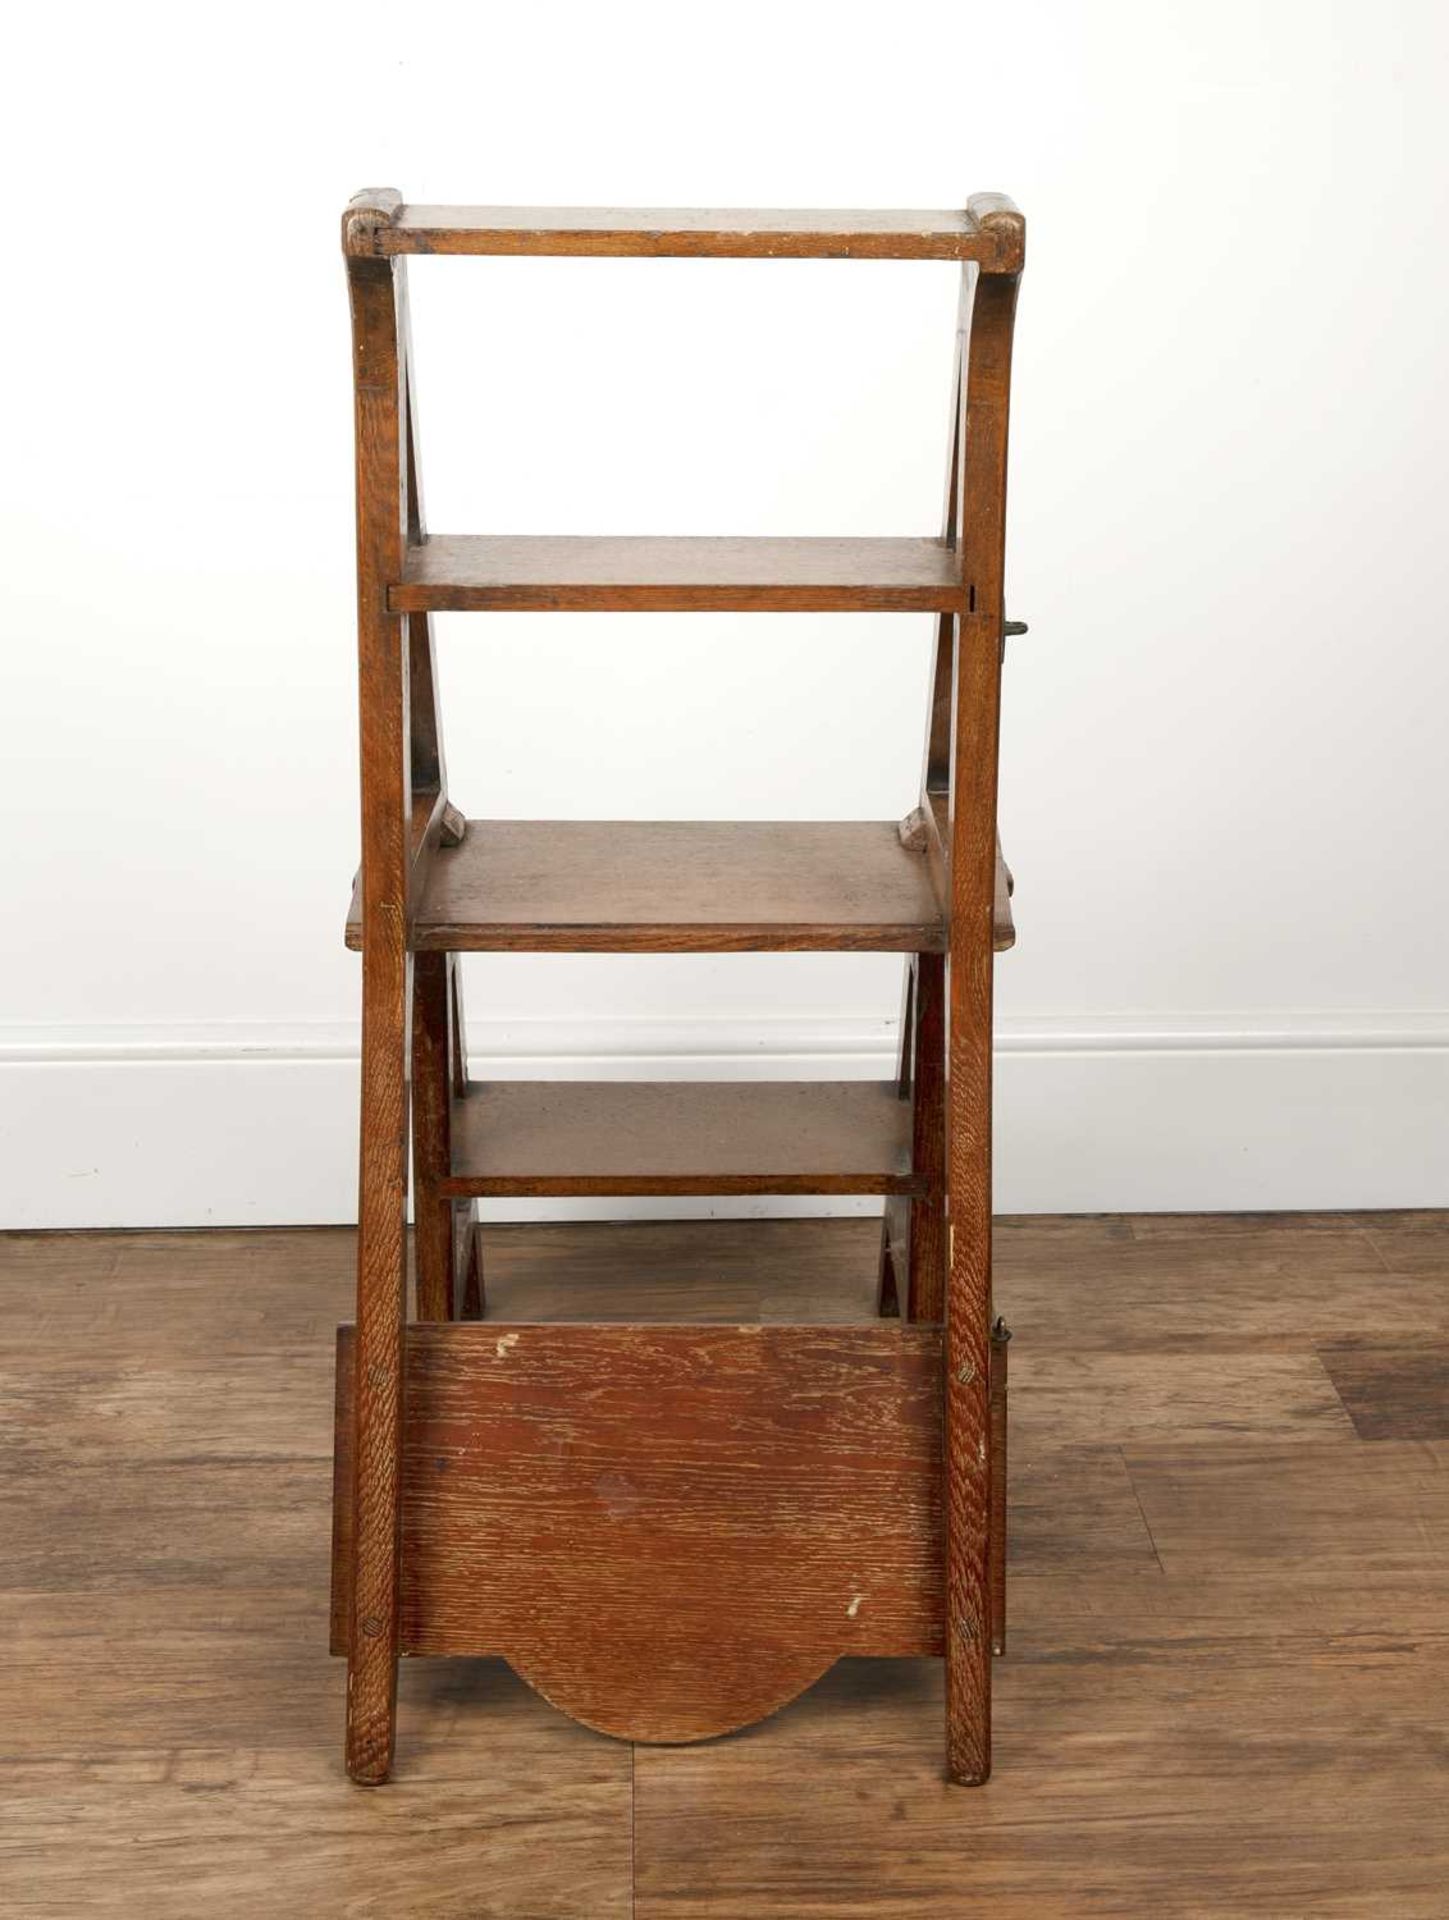 Oak metamorphic chair/library steps Victorian, with carved roundel back, 89cm high overall when - Image 5 of 5